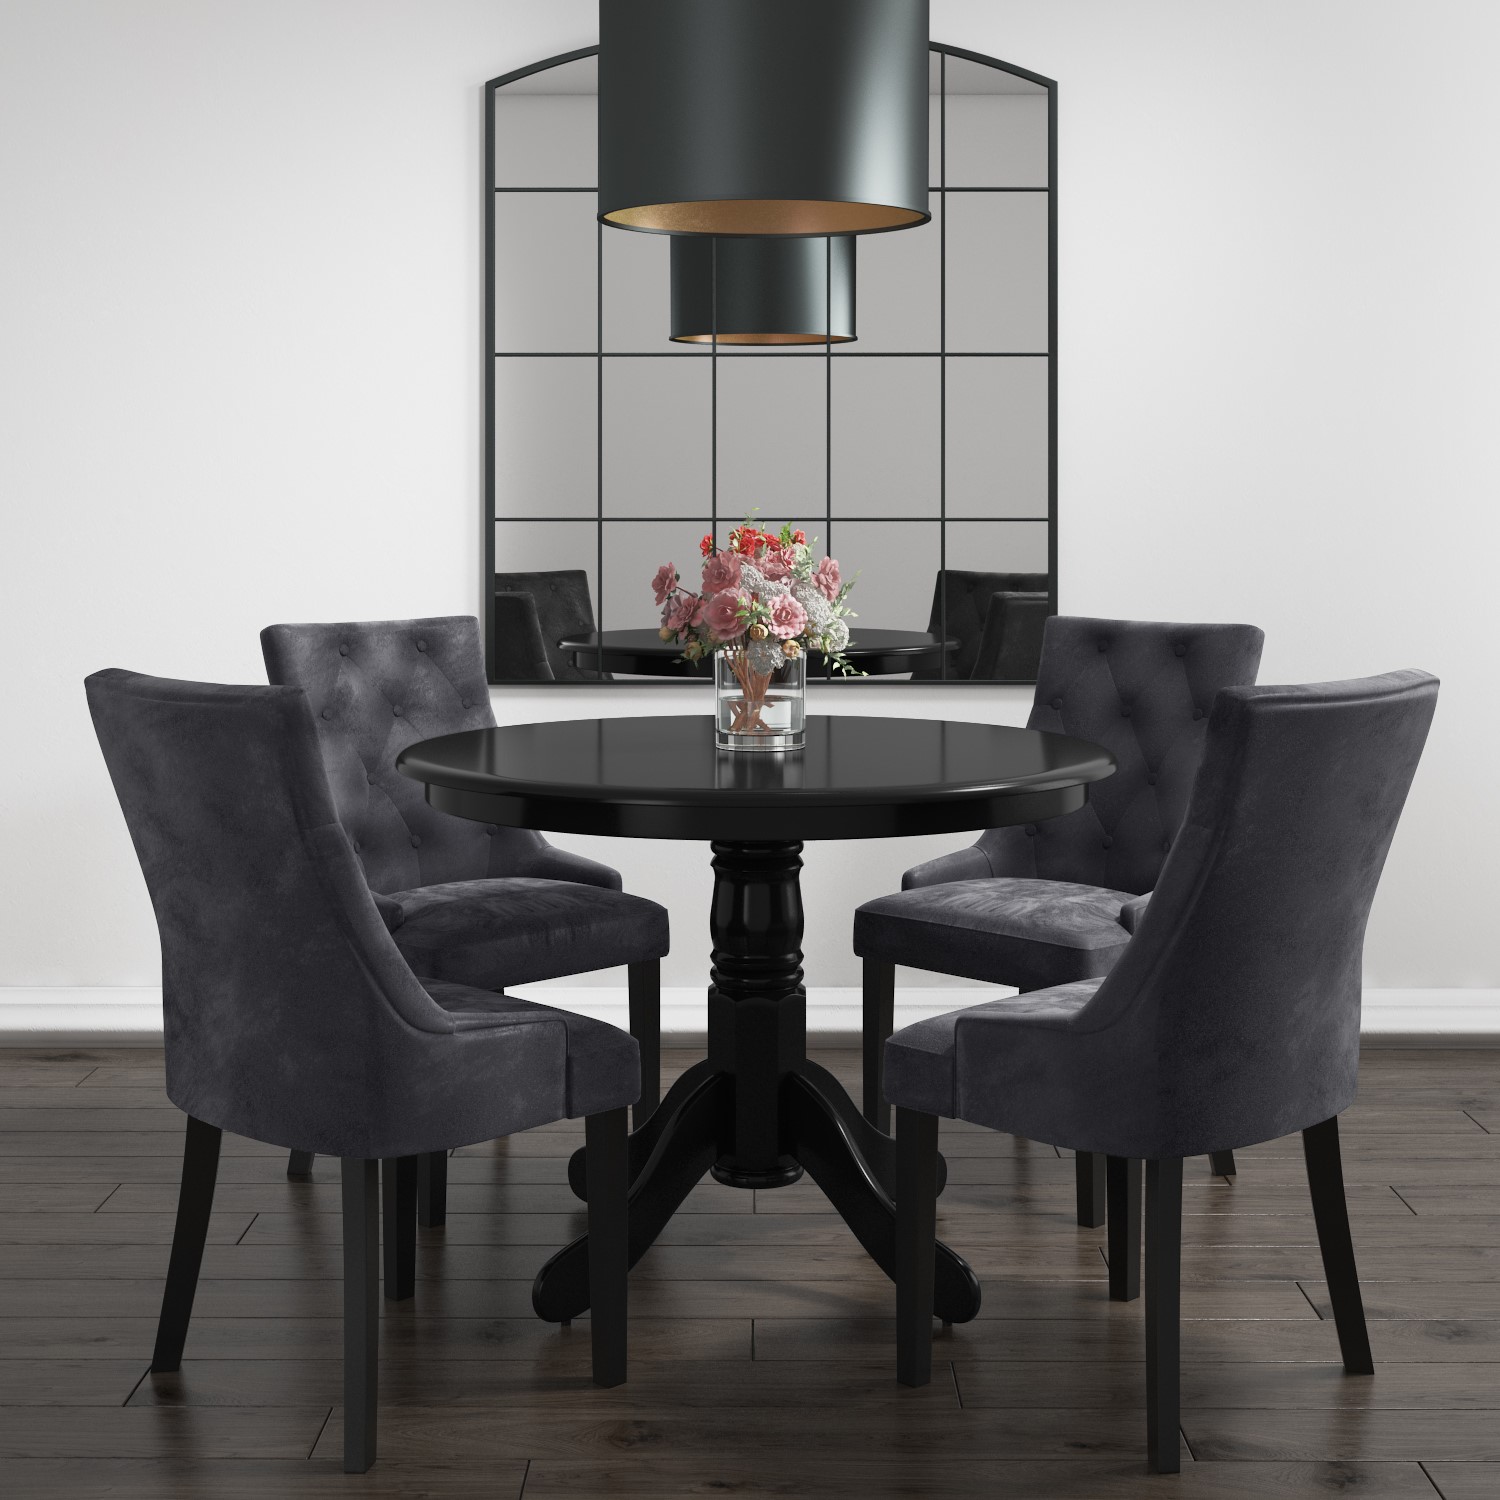 Small Round Dining Table In Black With 4 Velvet Chairs In Gr Bun/Rhd010